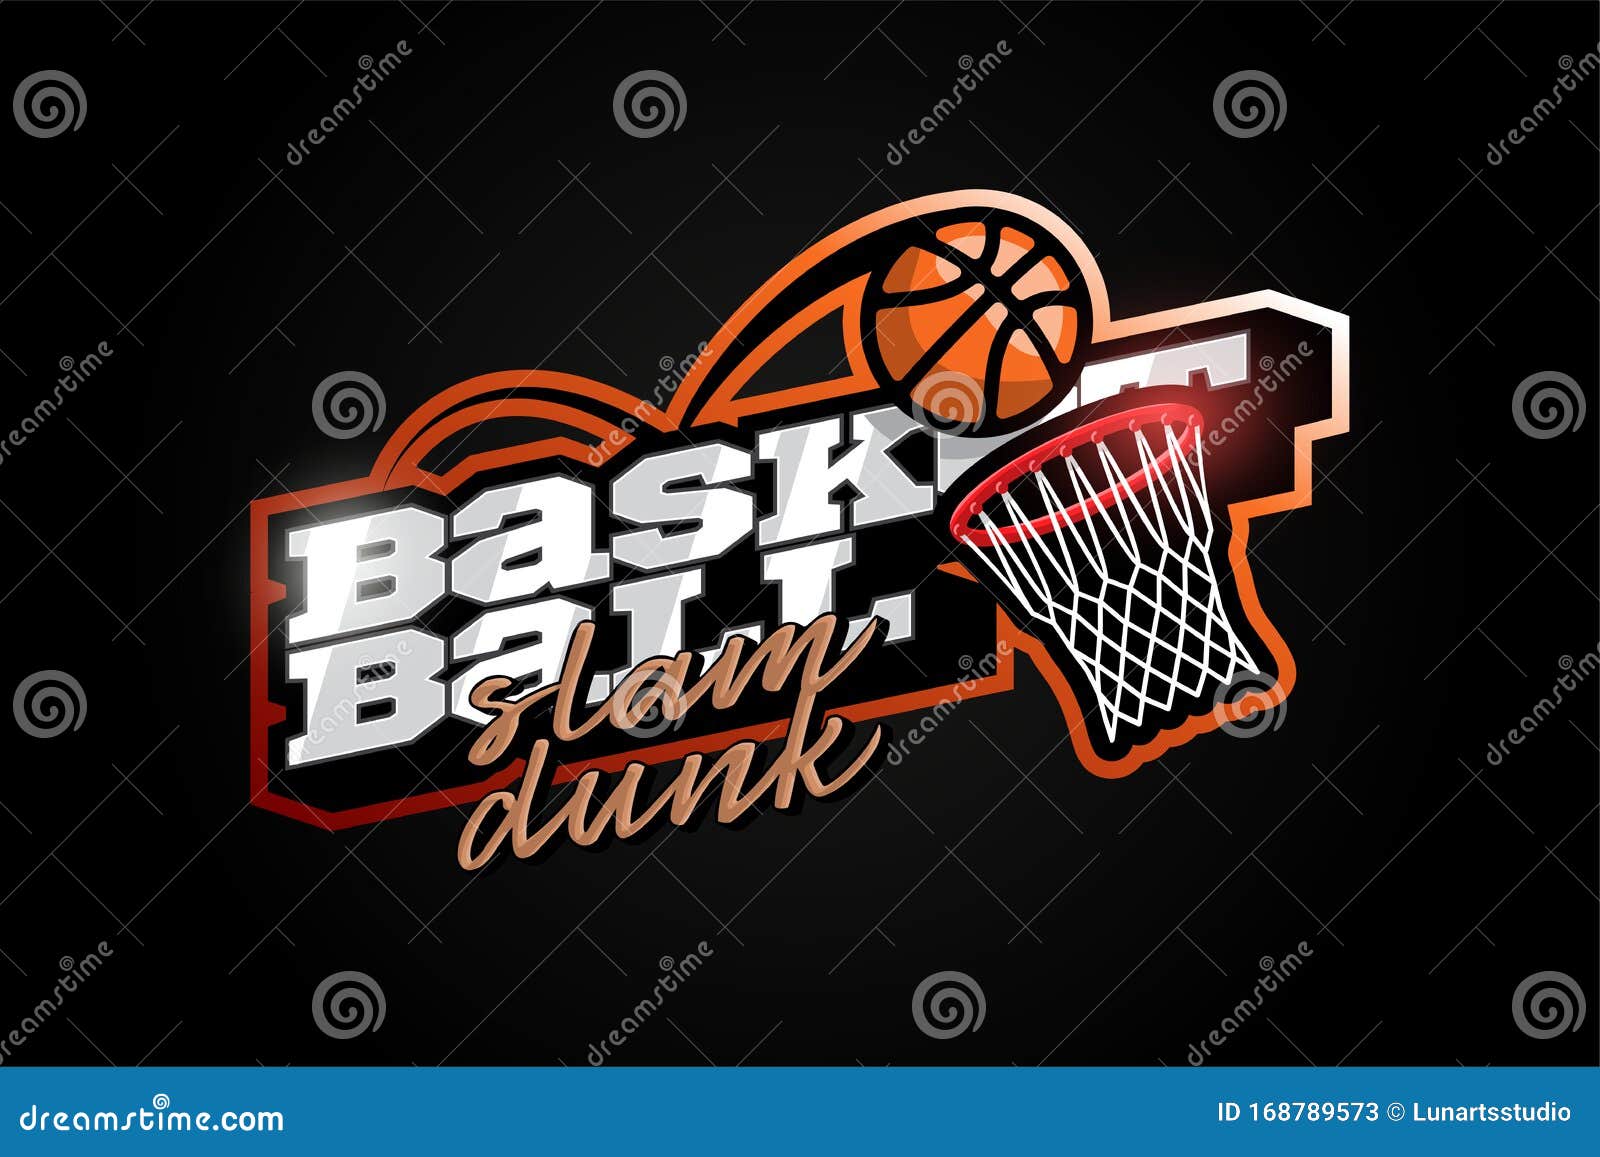 New Jersey Basketball Team Logo For Clothing Or Branding. Vintage Or Retro  Sign For American Streetball Championship. Sport Ball For Exclusive Gear Or  Wear. National Or Urban Game Advertising Royalty Free SVG